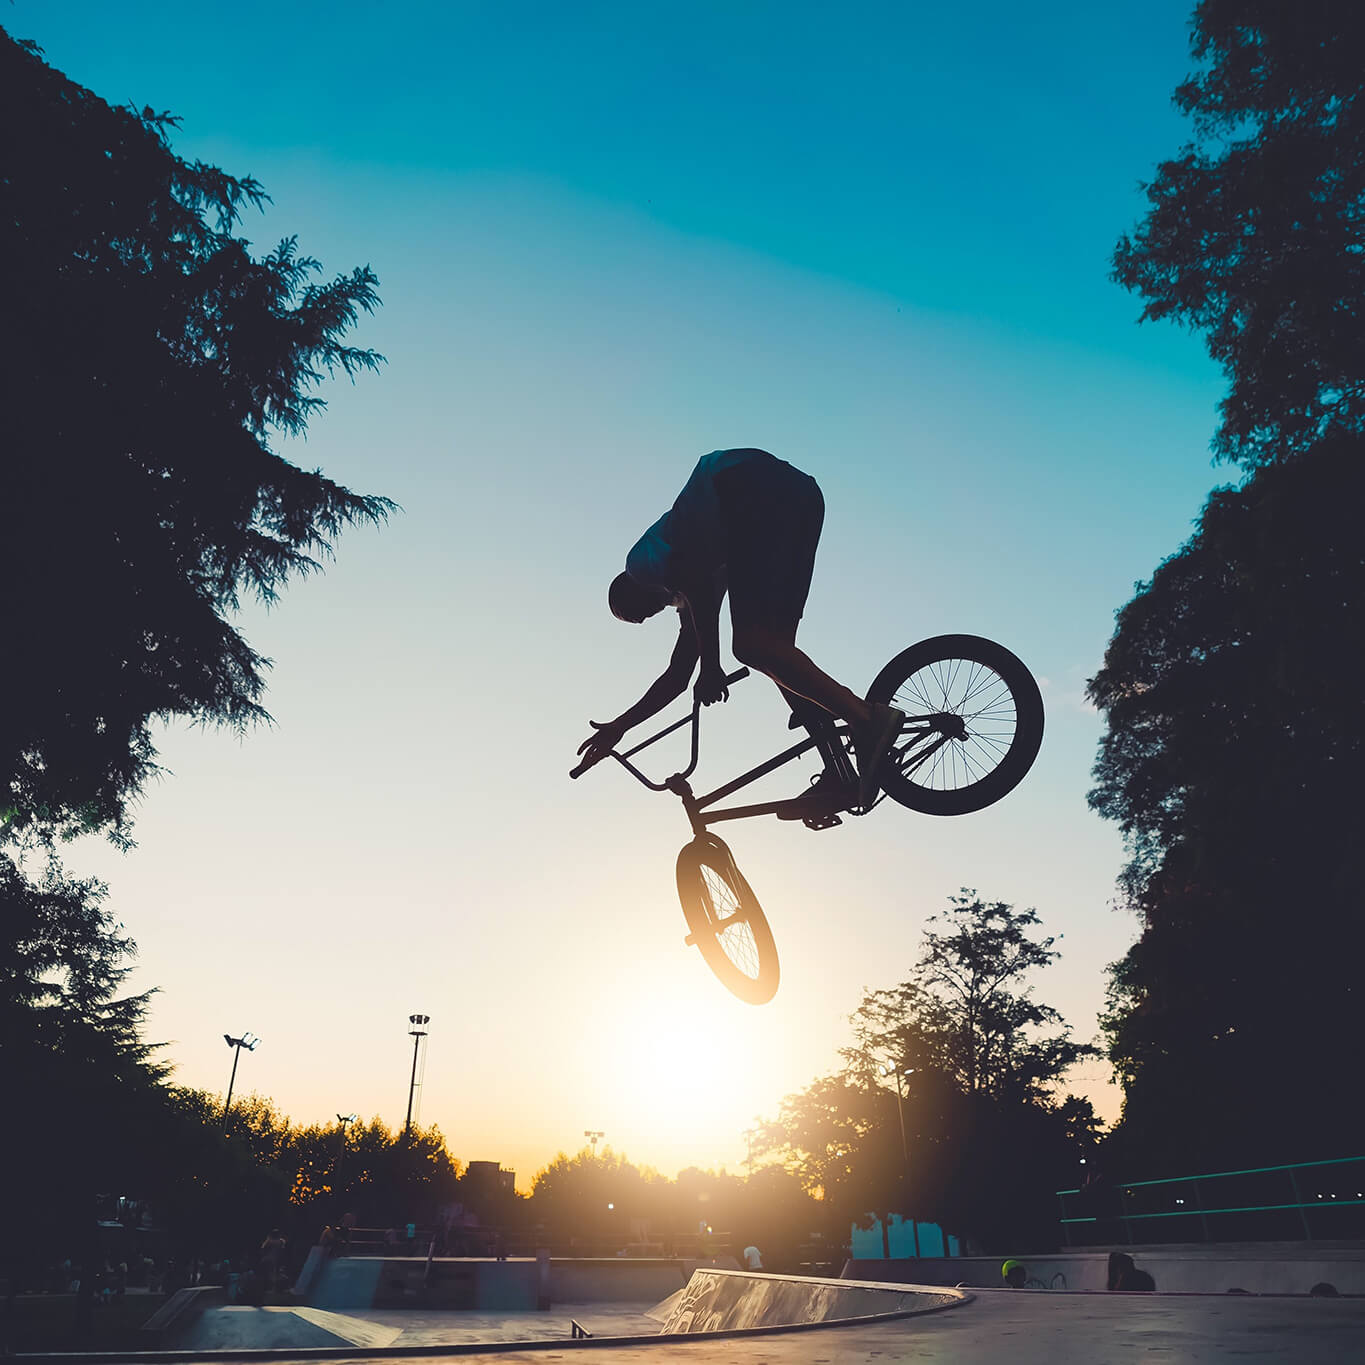 A BMX bile mid air with the sun in background